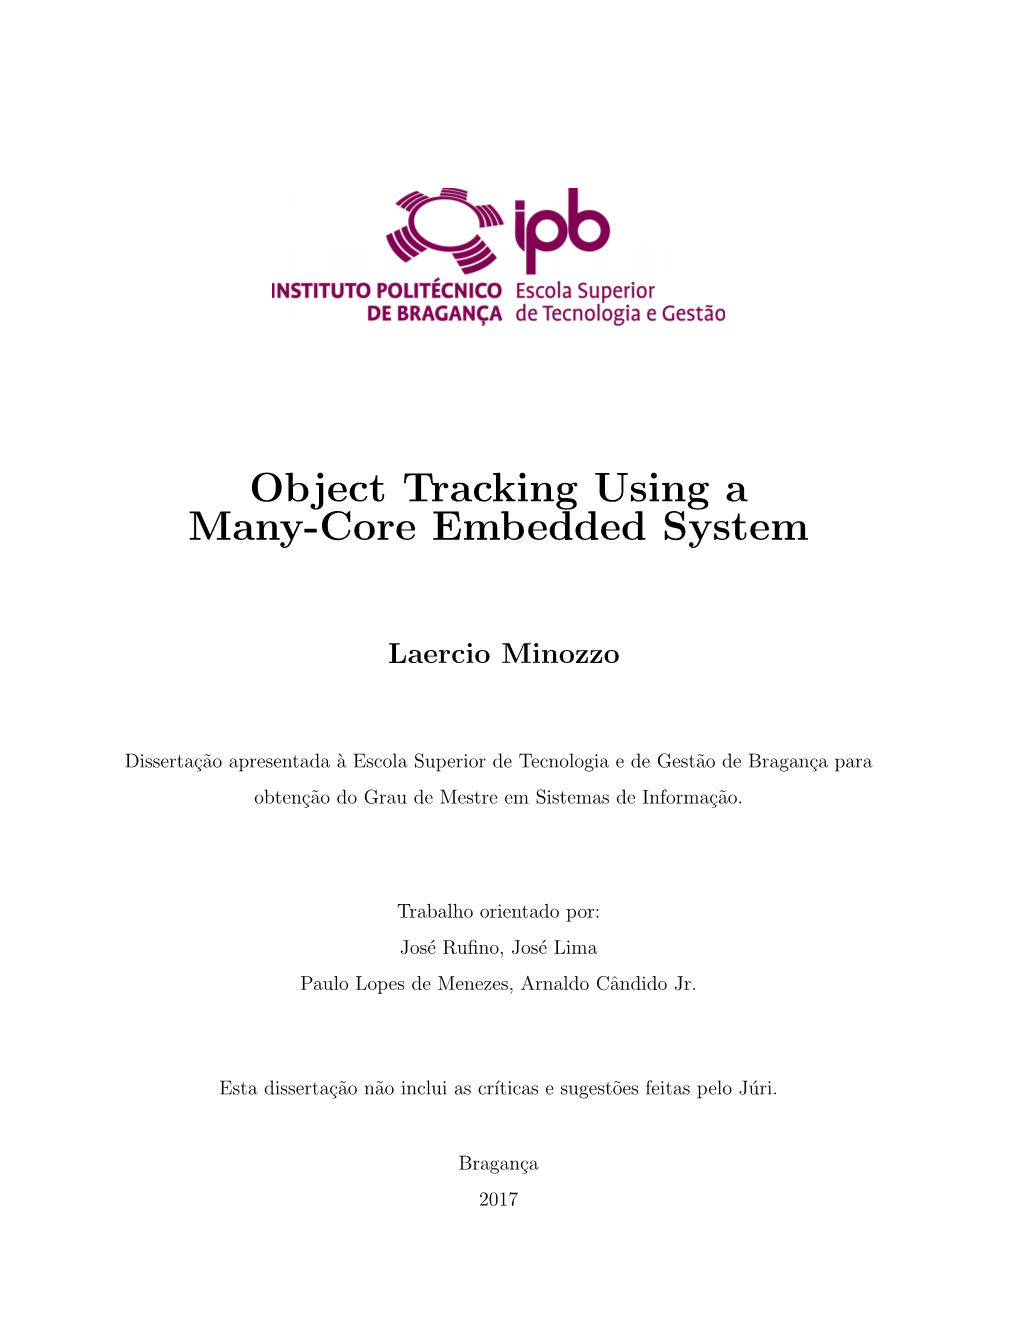 Object Tracking Using a Many-Core Embedded System